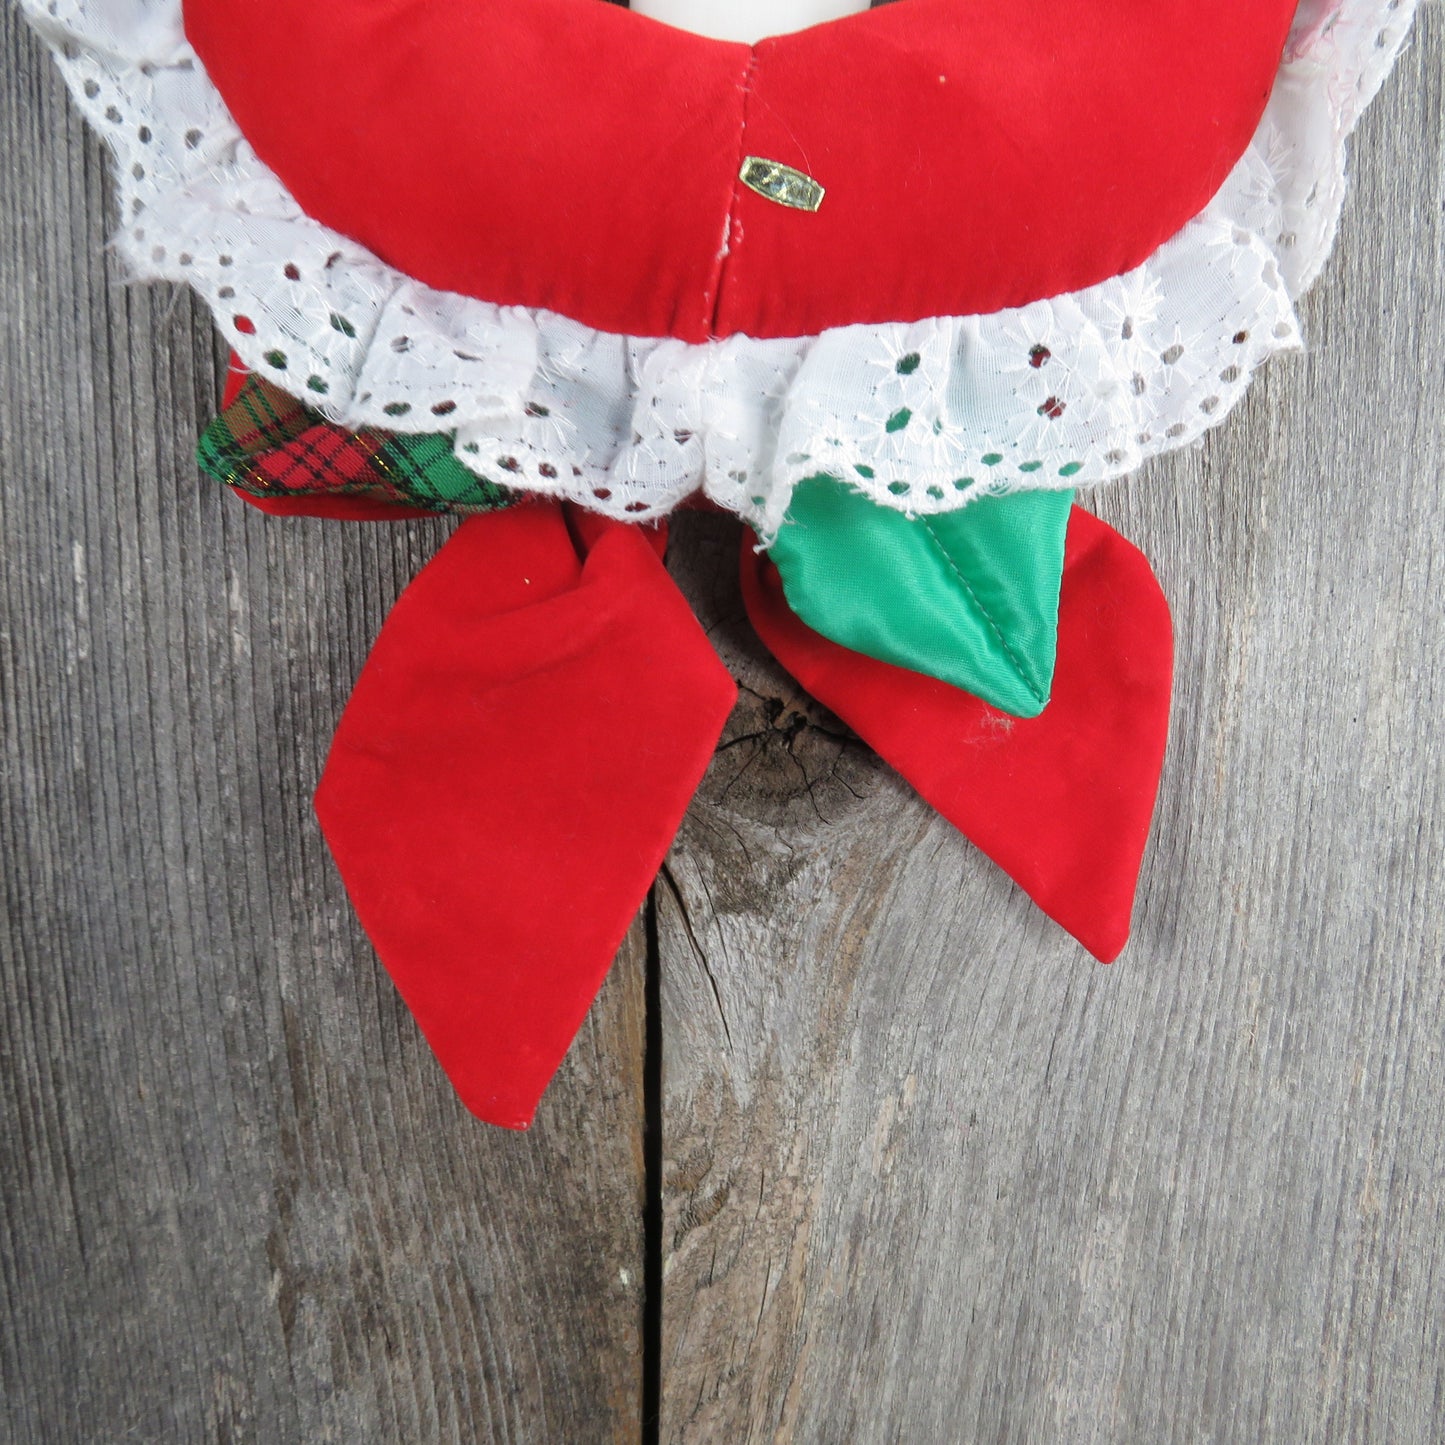 Vintage Red Velvet Fabric Wreath with Cloth Candle White Lace Velveteen Christmas Holly and Bow Made in Taiwan